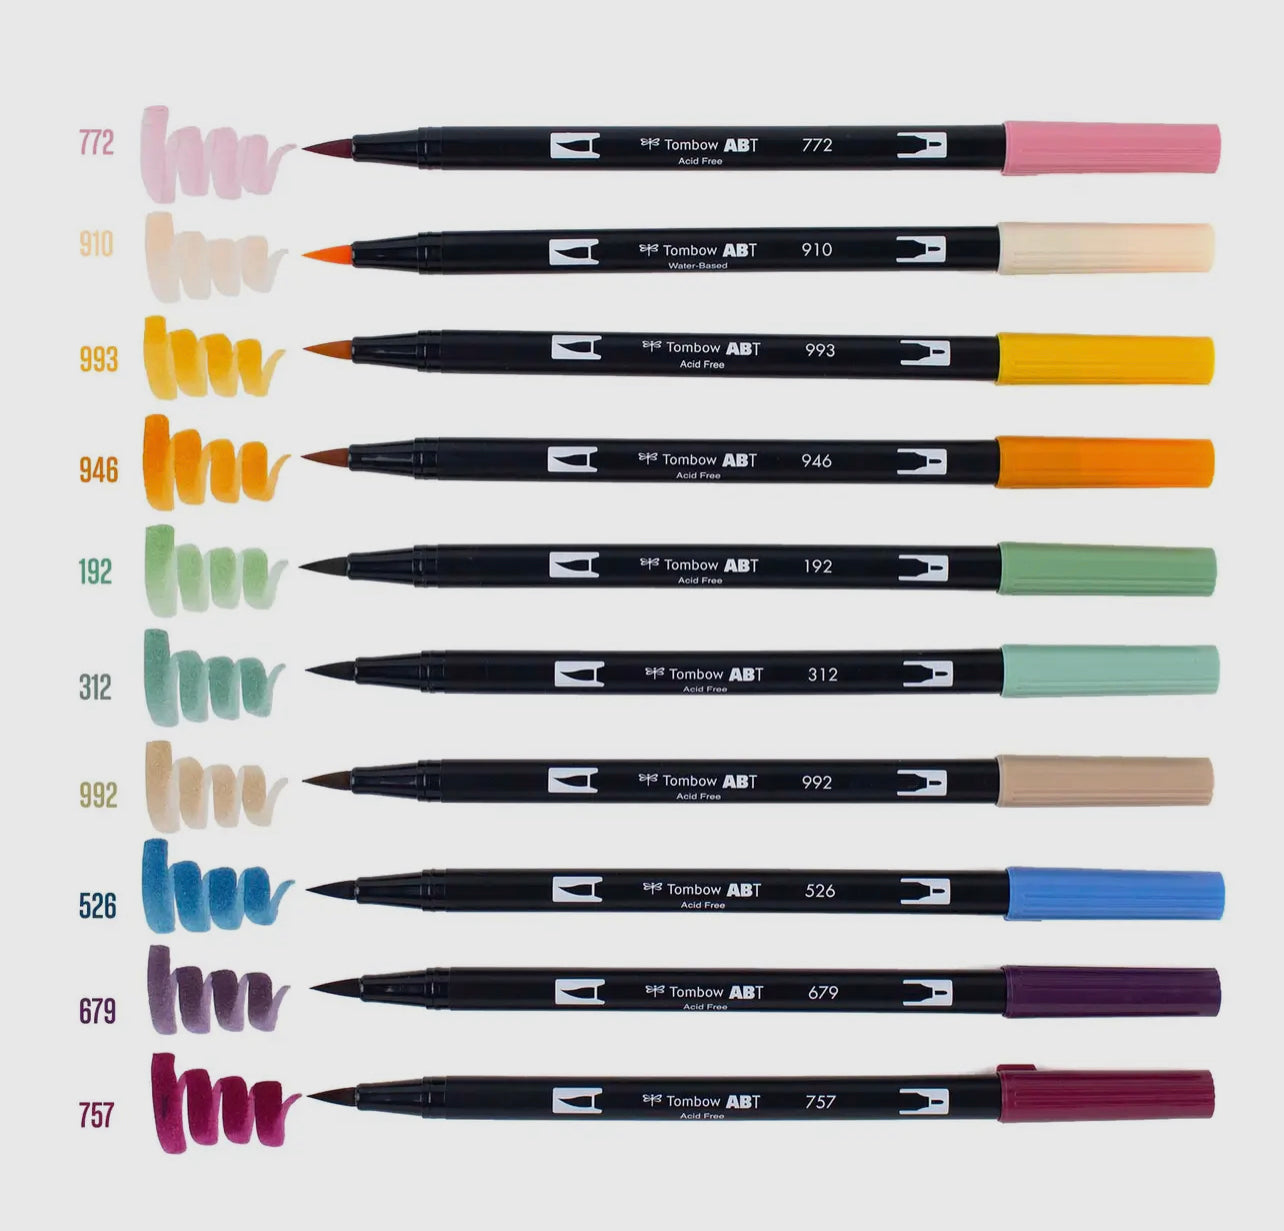 Dual Brush Pen Art Markers, Cottage, 10 pack